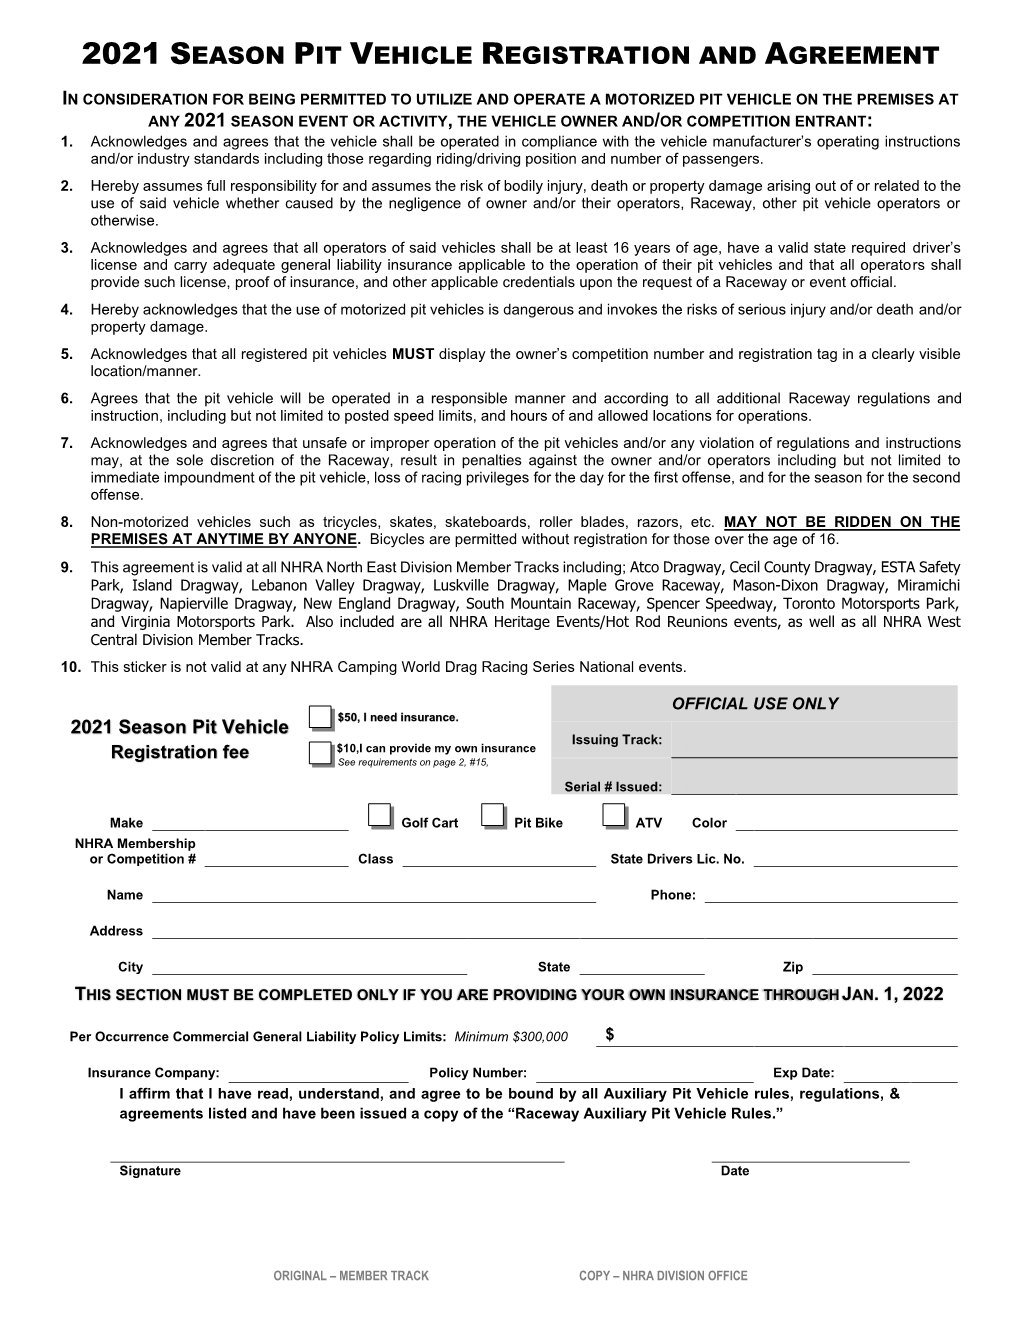 Division 1 Pit Vehicle Registration and Agreement